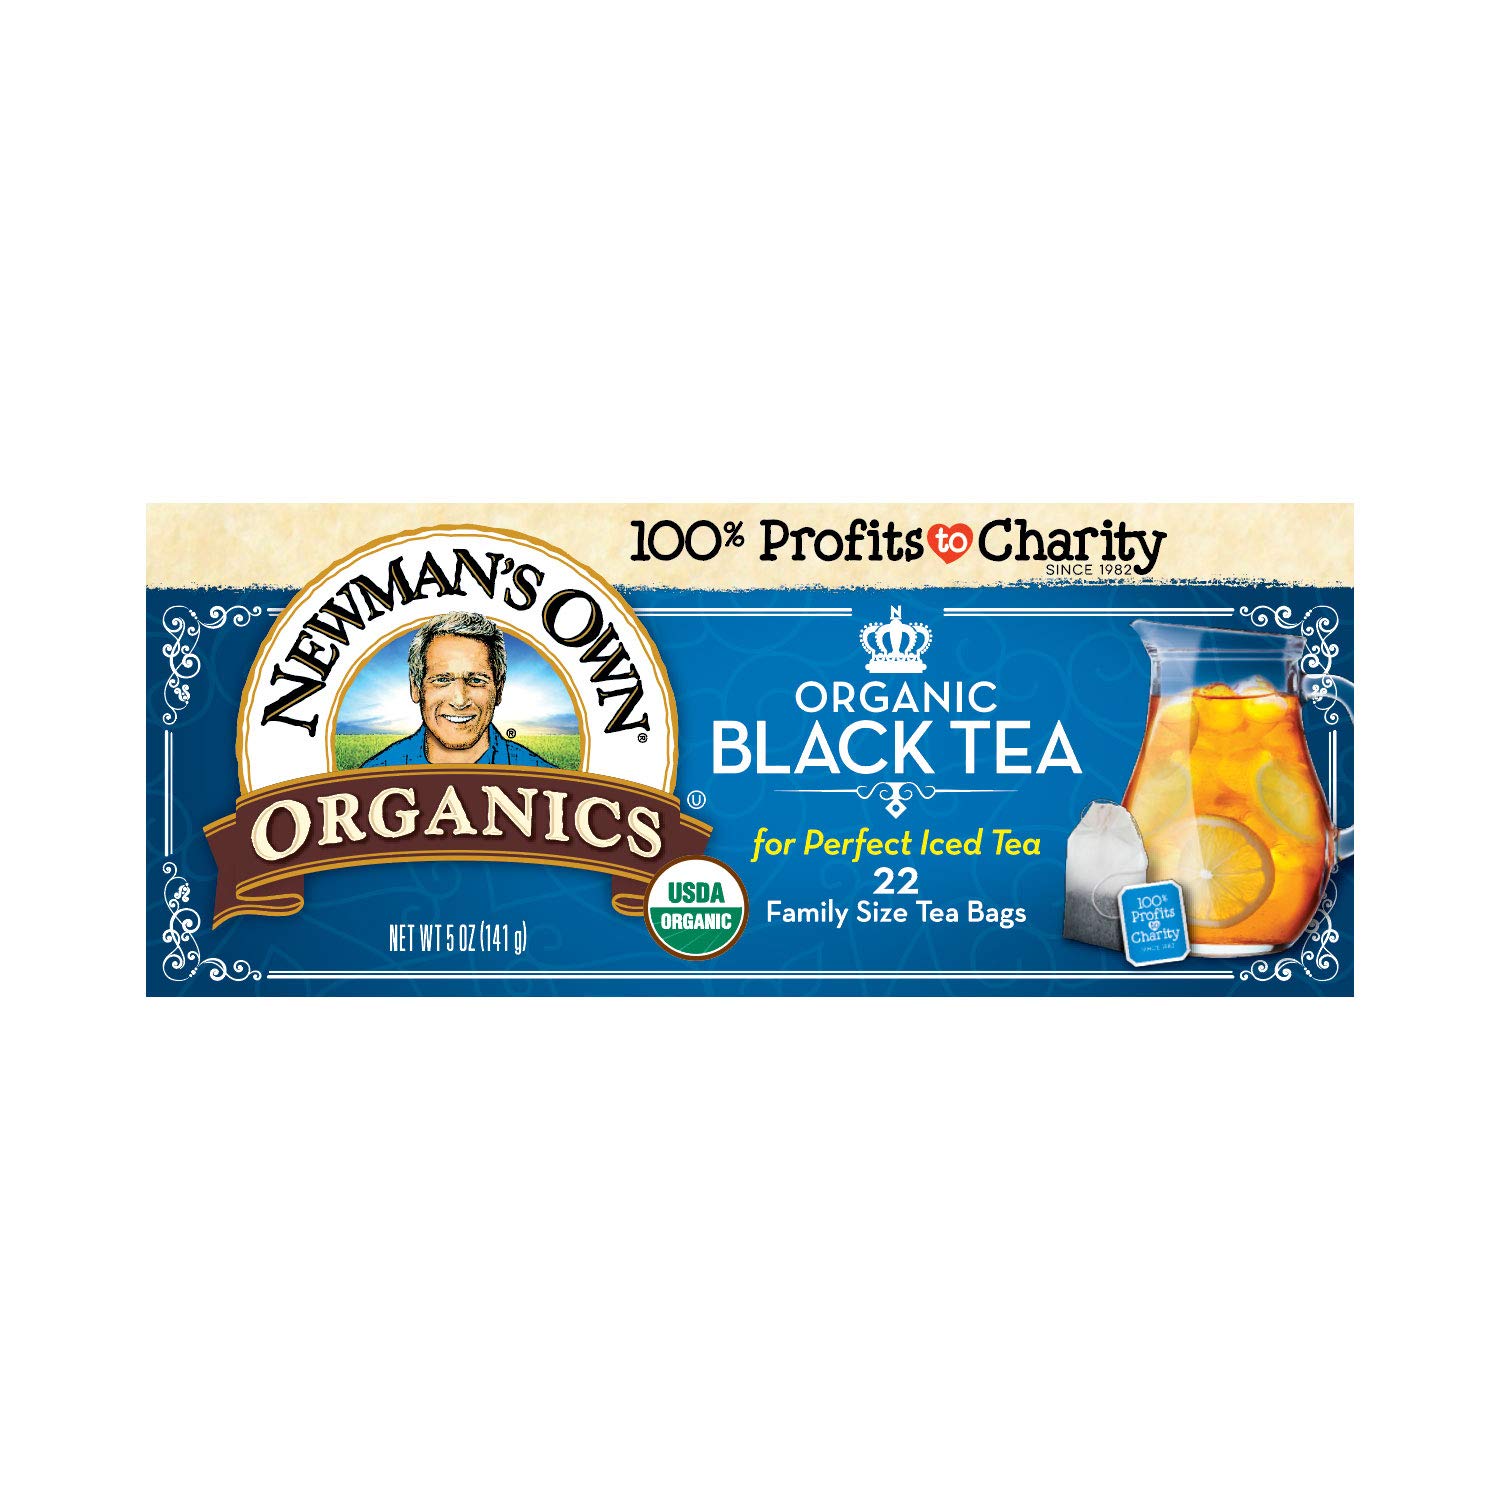 Newman's Own Organics Black Tea, Unsweetened Tea, USDA Certified Organic and Kosher, Contains Caffeine, 22 Family Size Individually Wrapped Black Tea Bags (Pack of 6)